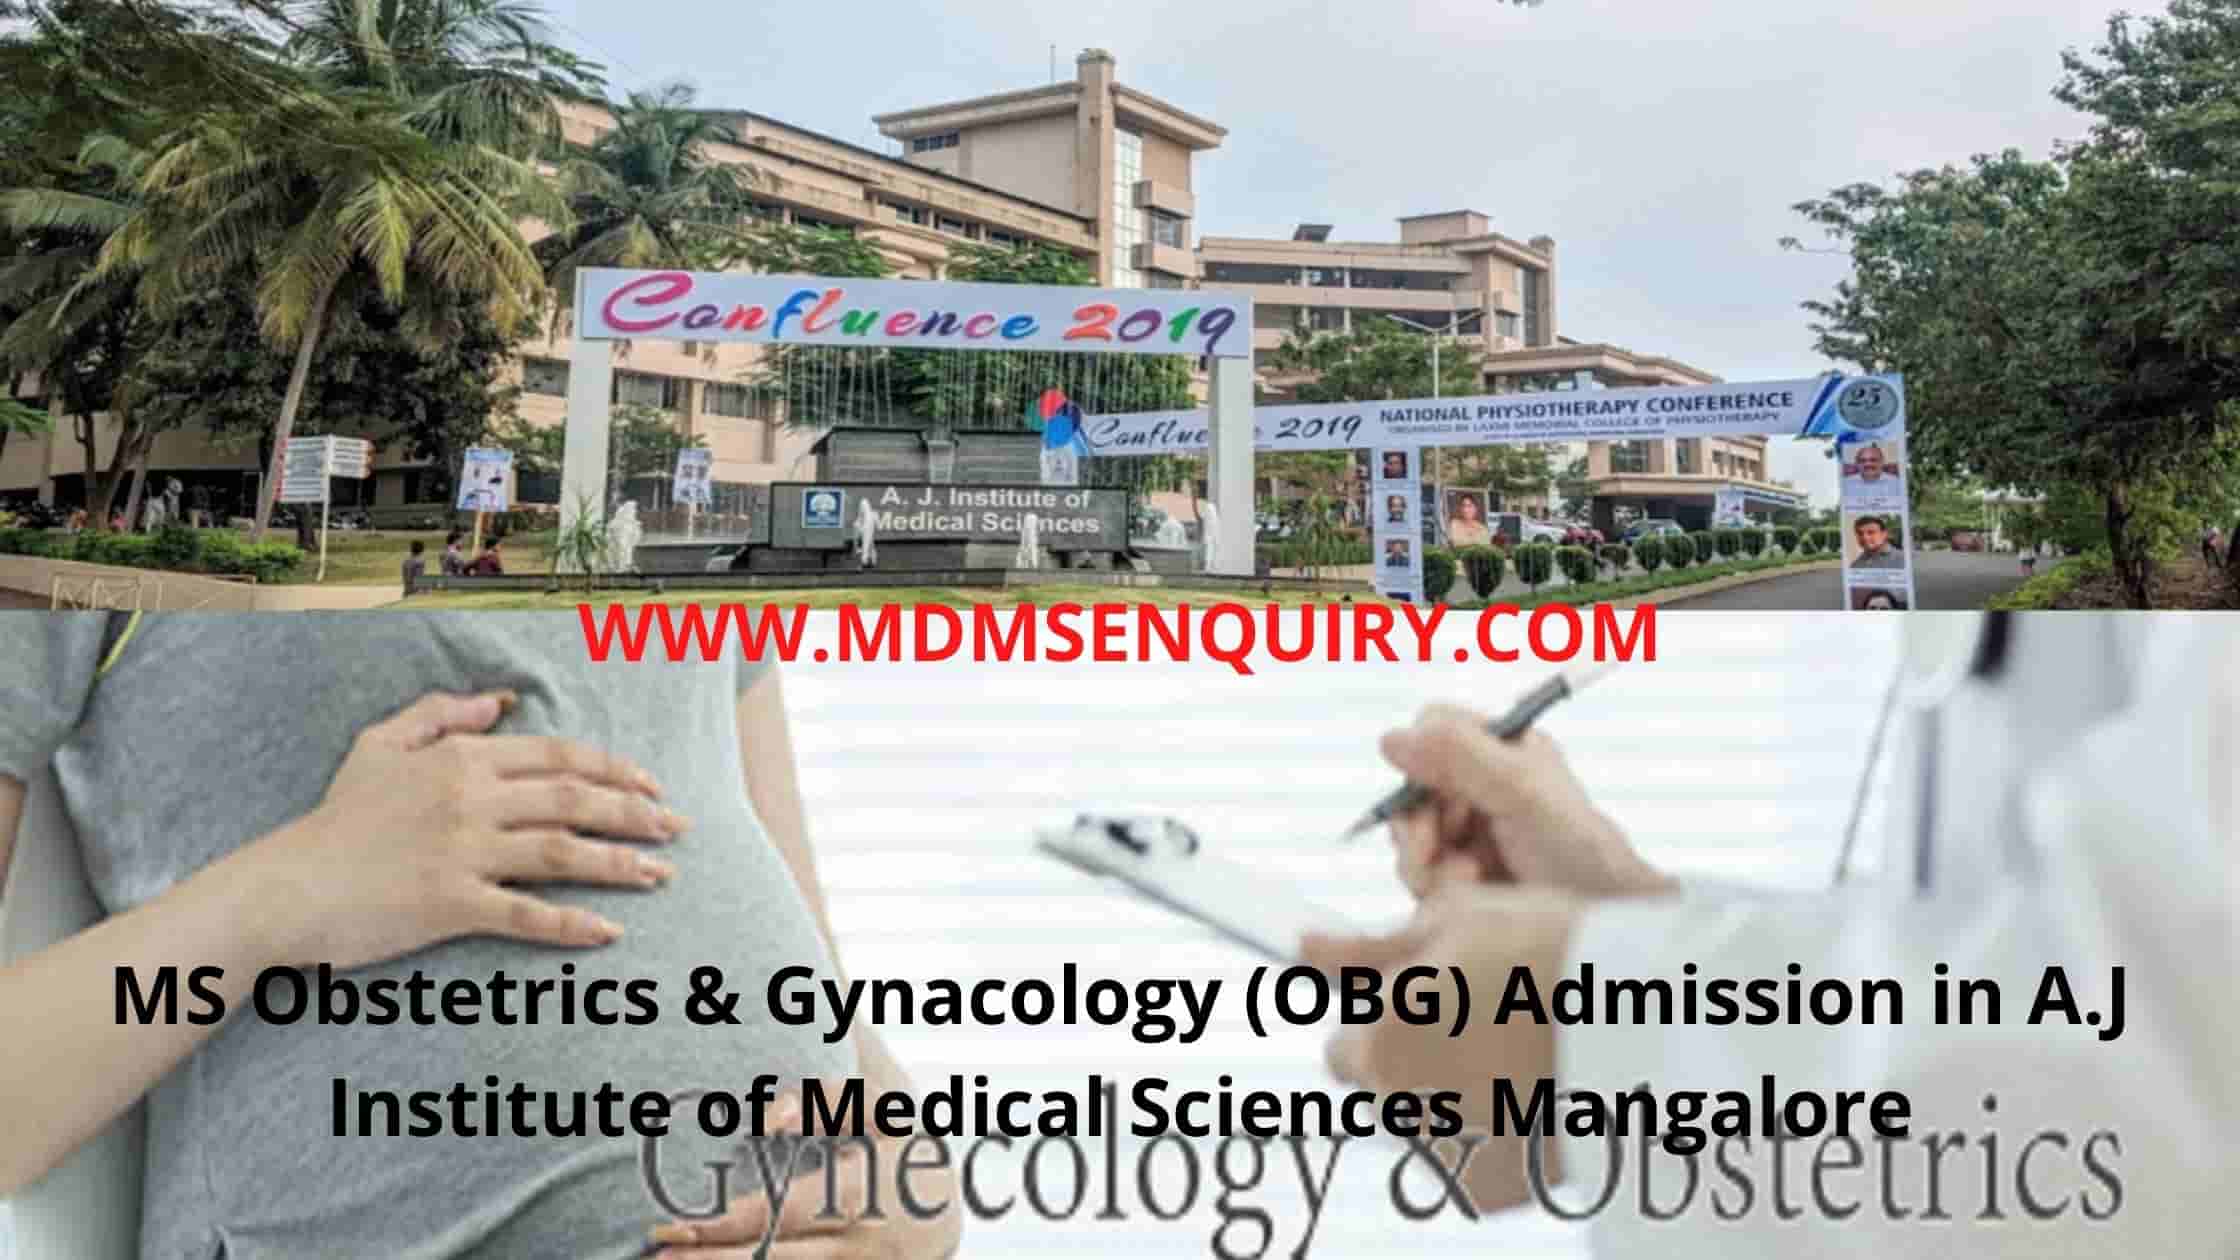 MS Obstetrics & Gynacology (OBG) admission in A.J Institute of Medical Sciences Mangalore